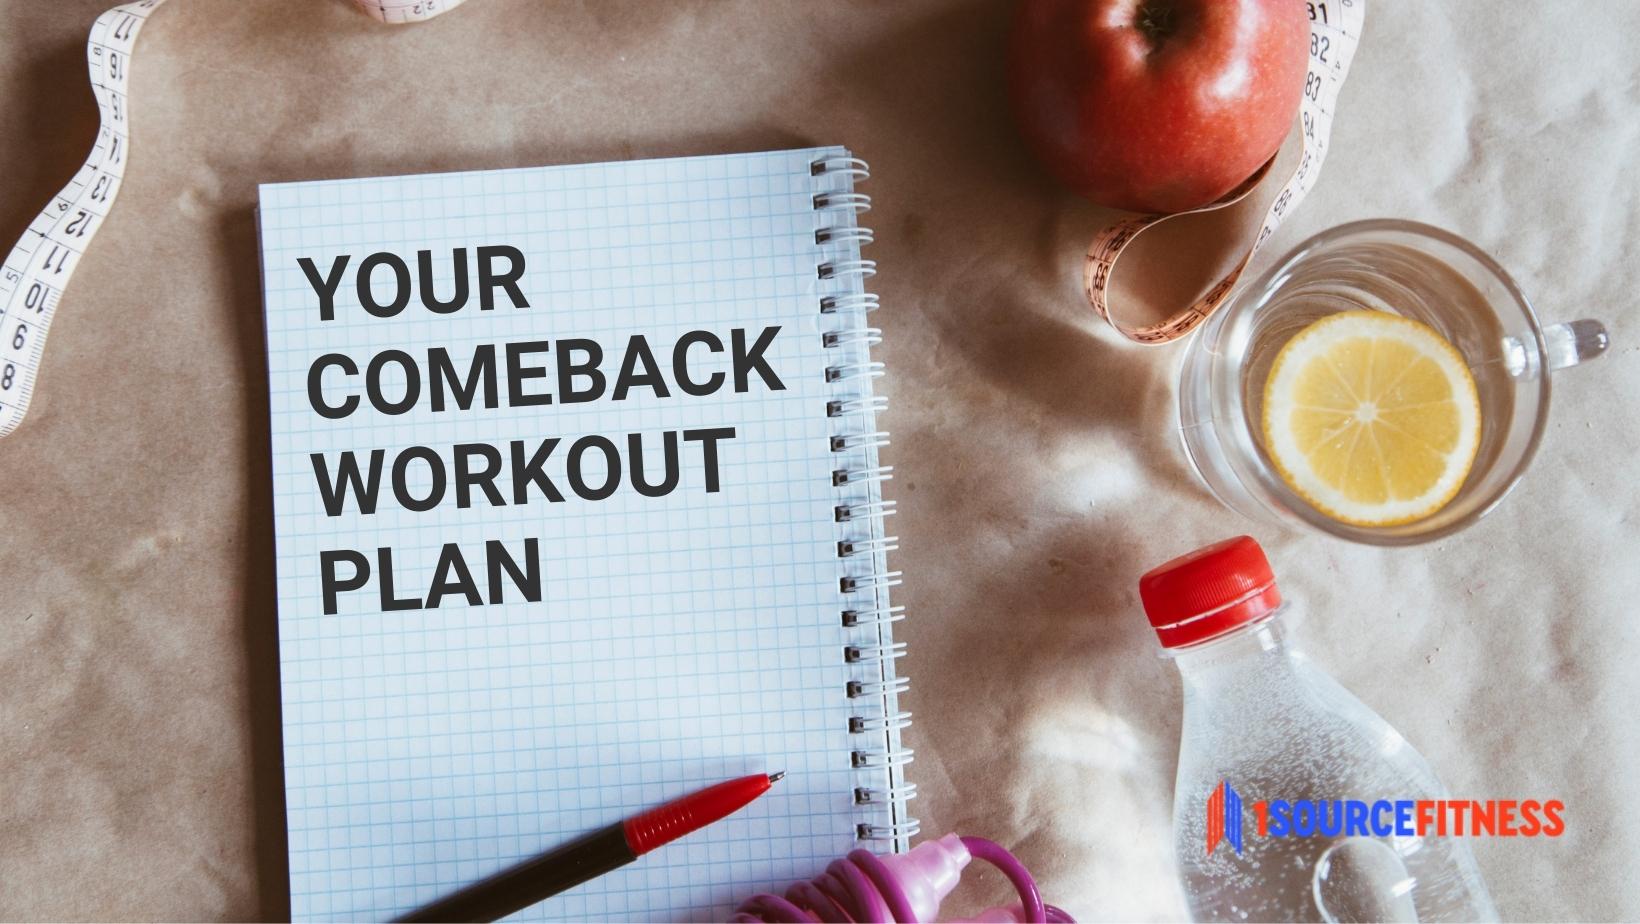 A notebook that reads 'Your Comeback Workout Plan' that lays on a table surrounded by an apple, bottled water, and a tape measure.